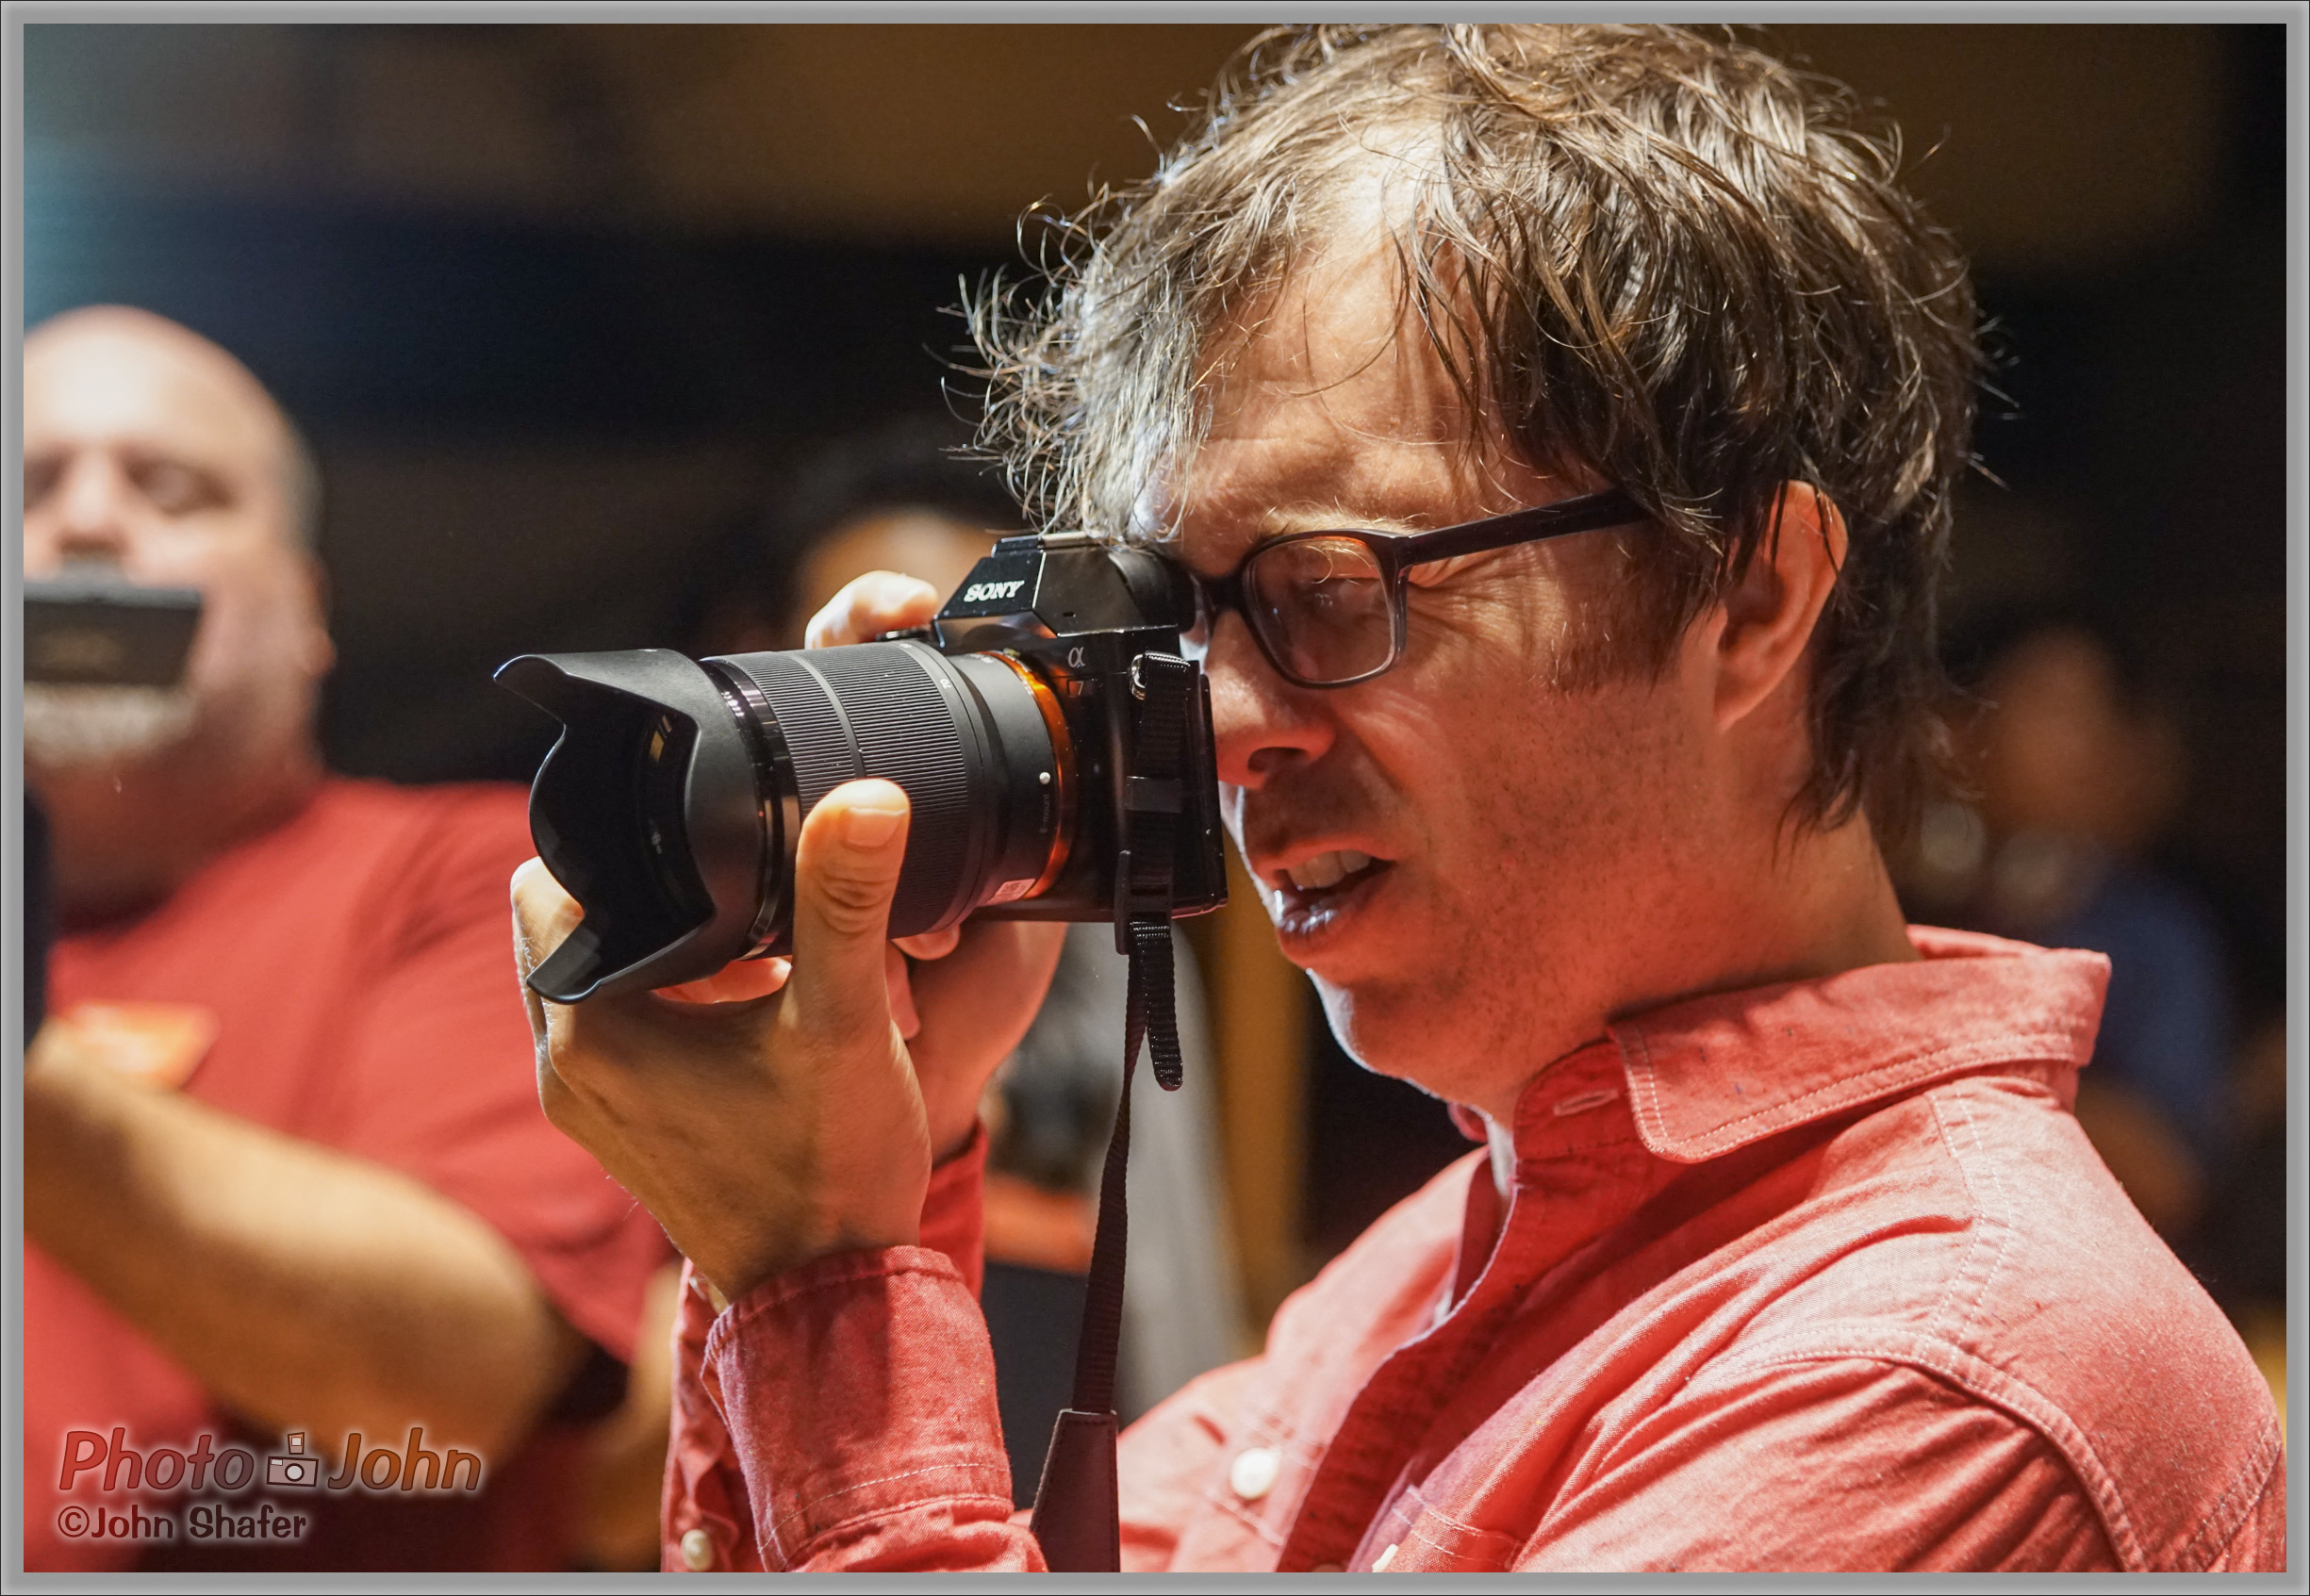 Sony Alpha A7R at ISO 2500 - Musician Ben Folds Tries Out the Sony Alpha A7